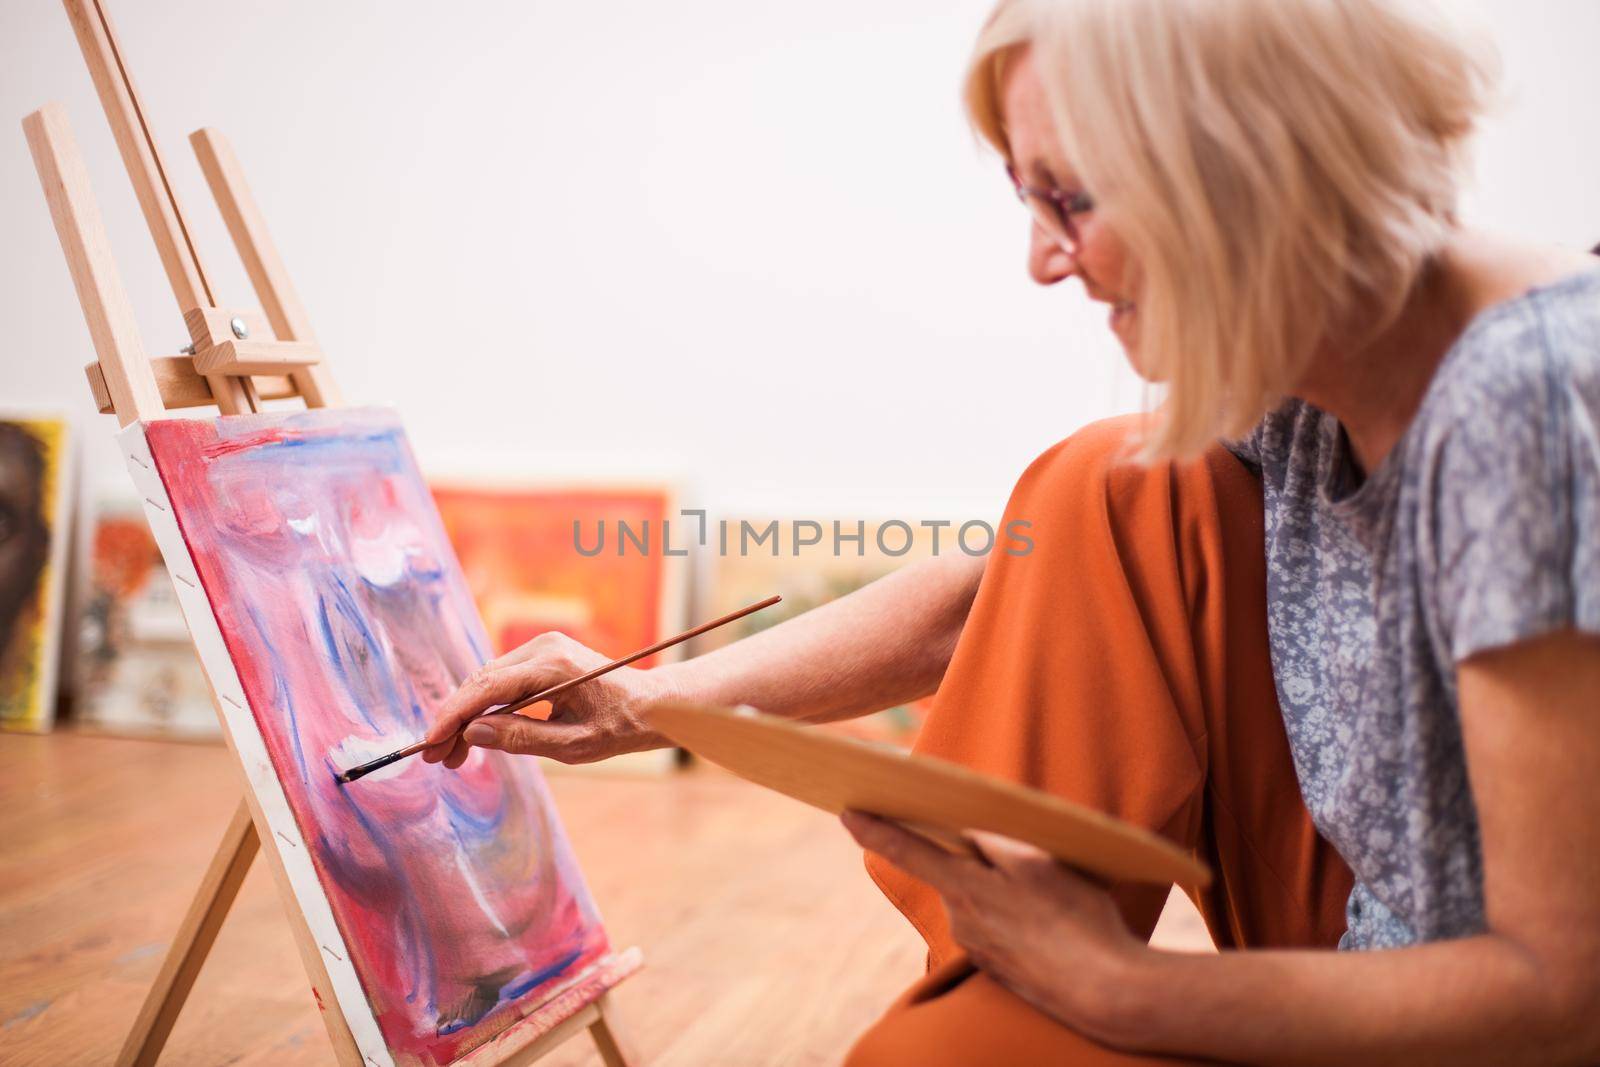 Elderly woman is painting in her home. Retirement hobby.